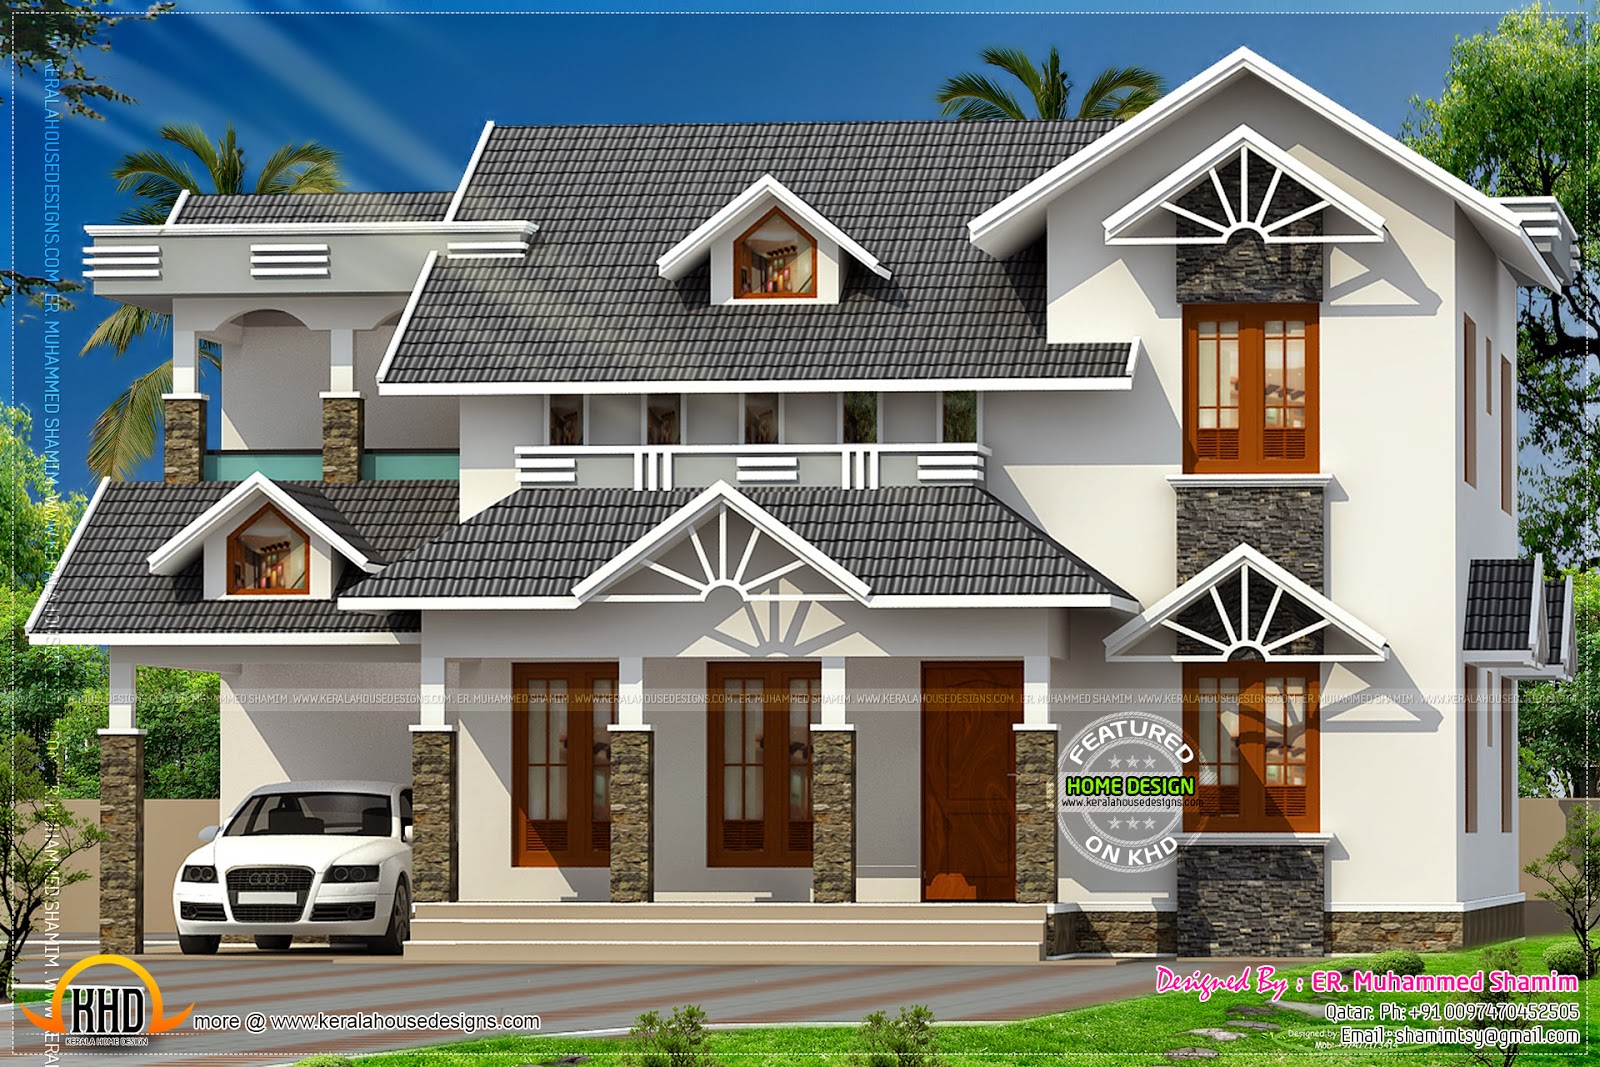 Nice sloped roof Kerala home design ~ Indian House Plans